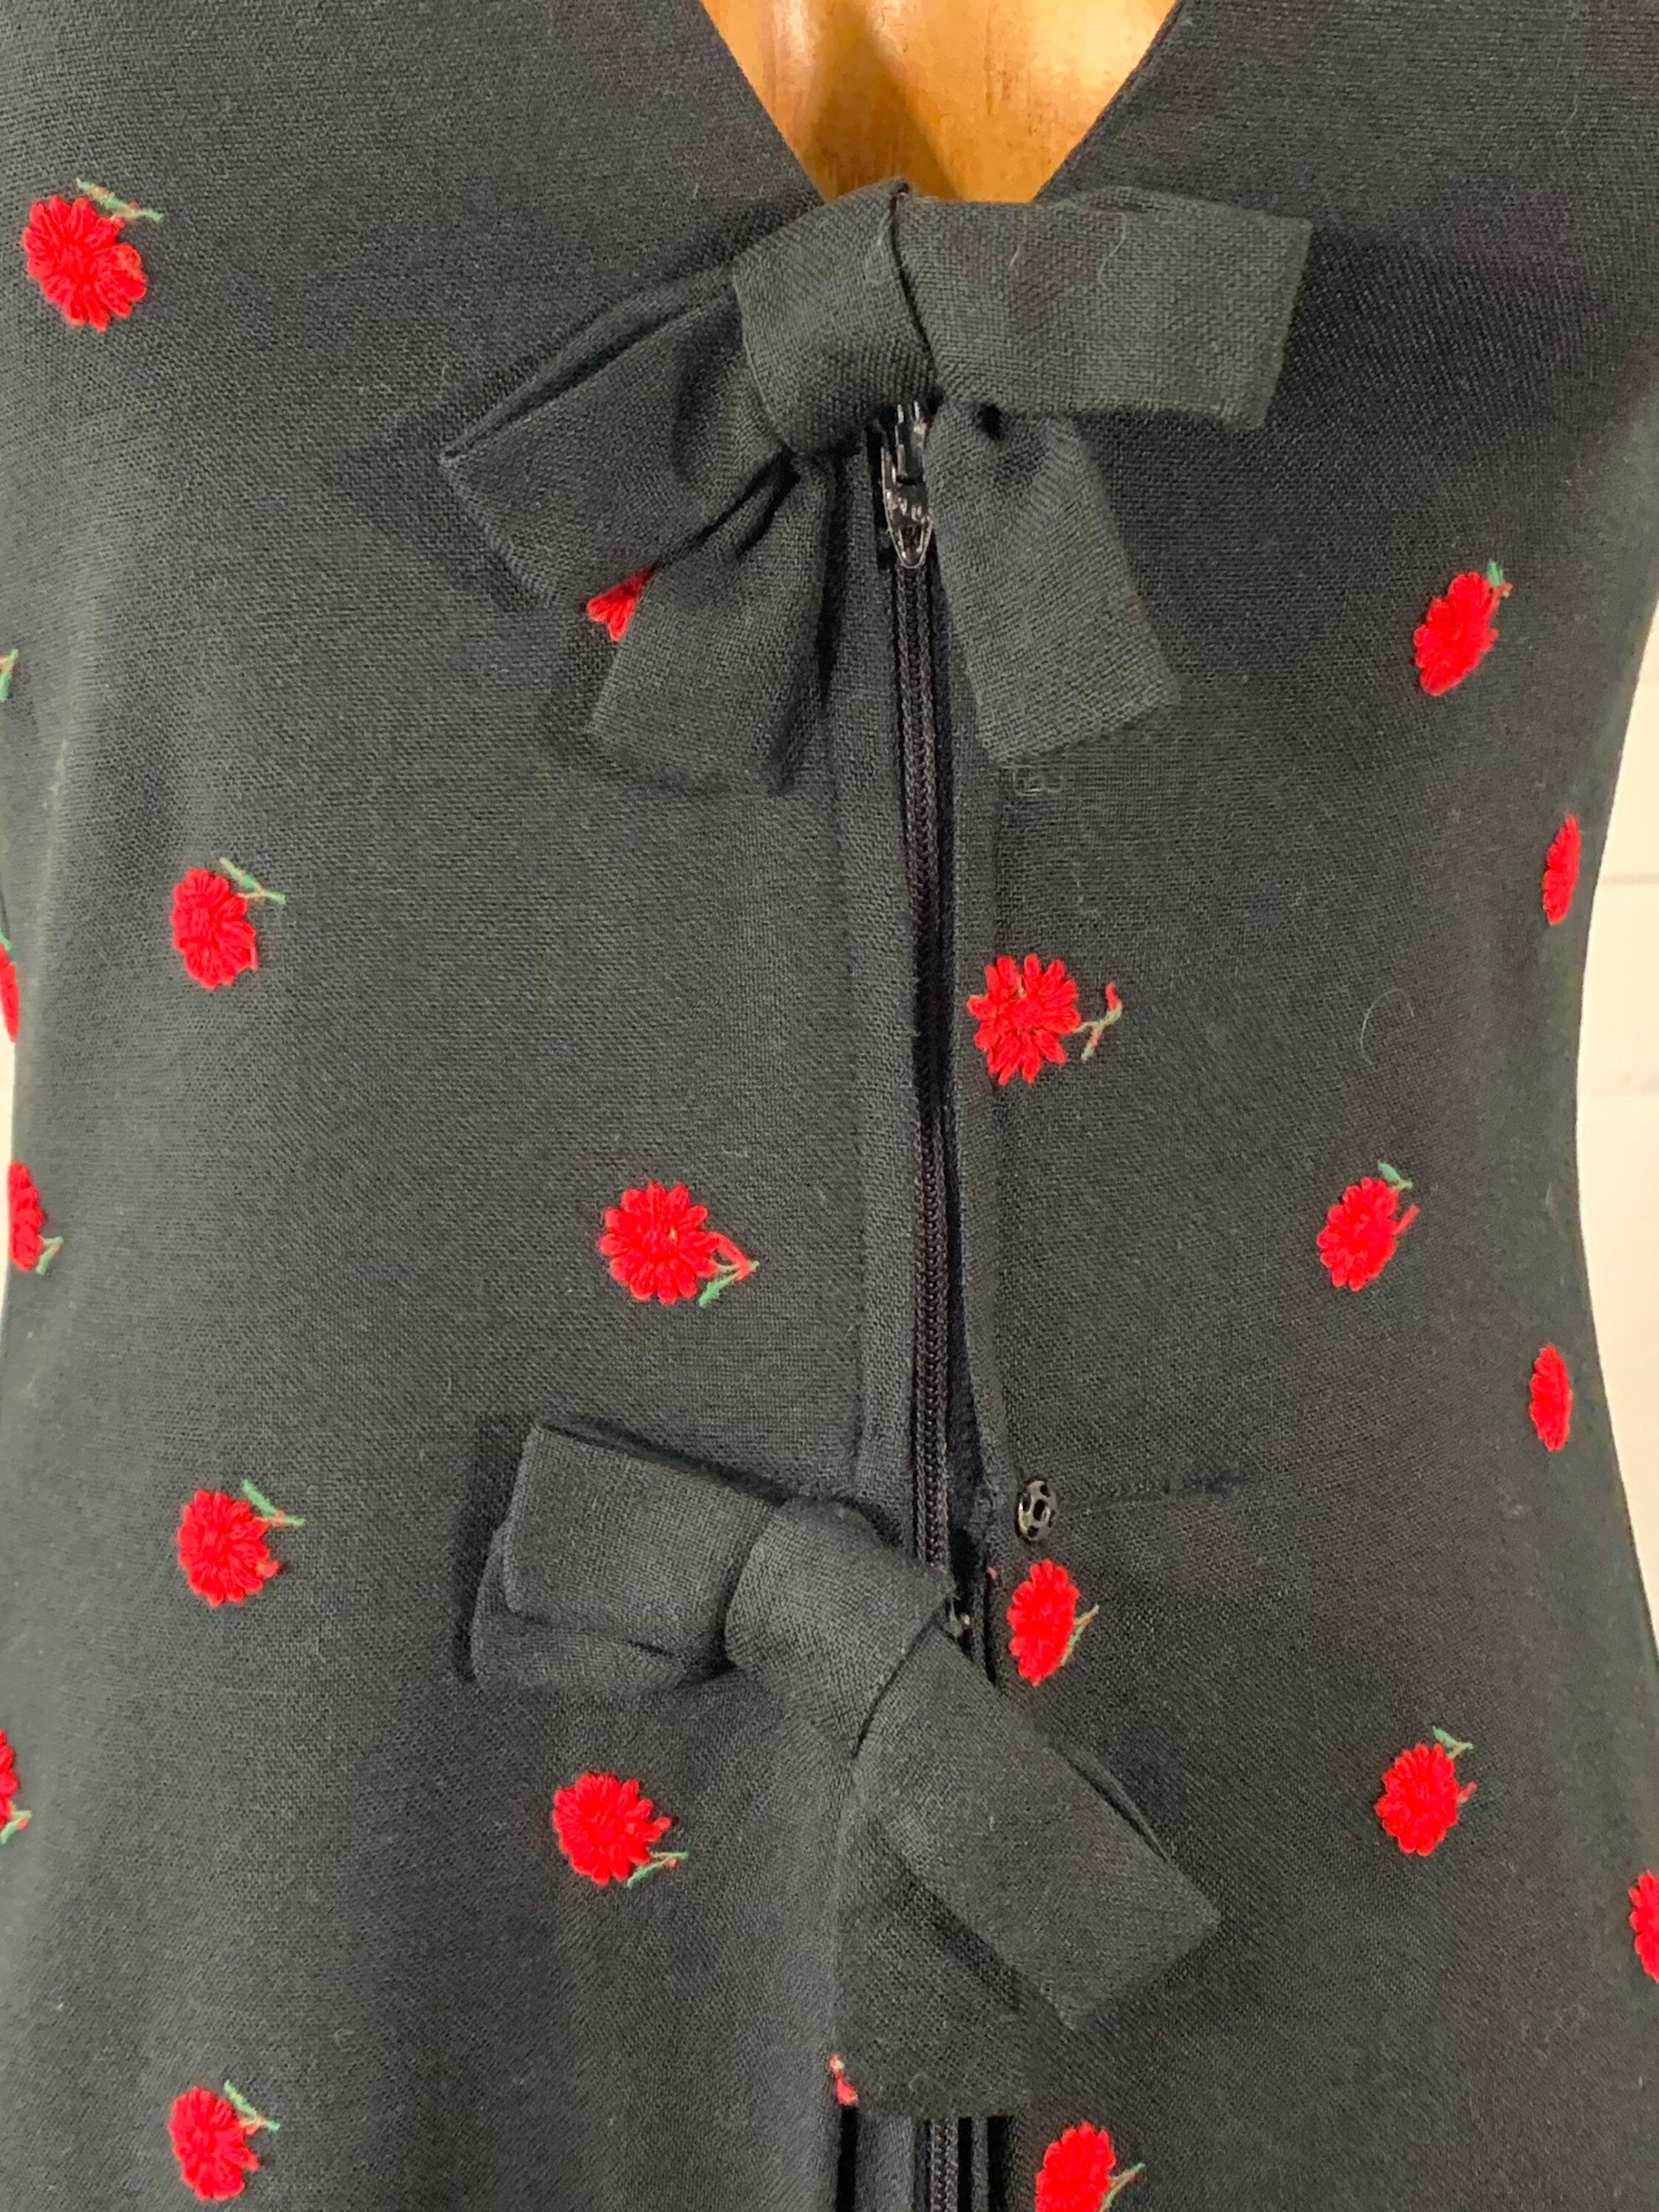 Vintage Black Casual Dress with Embroidered Red Flowers and Black Bows | Size S | Summer Cocktail Dress Day Dress